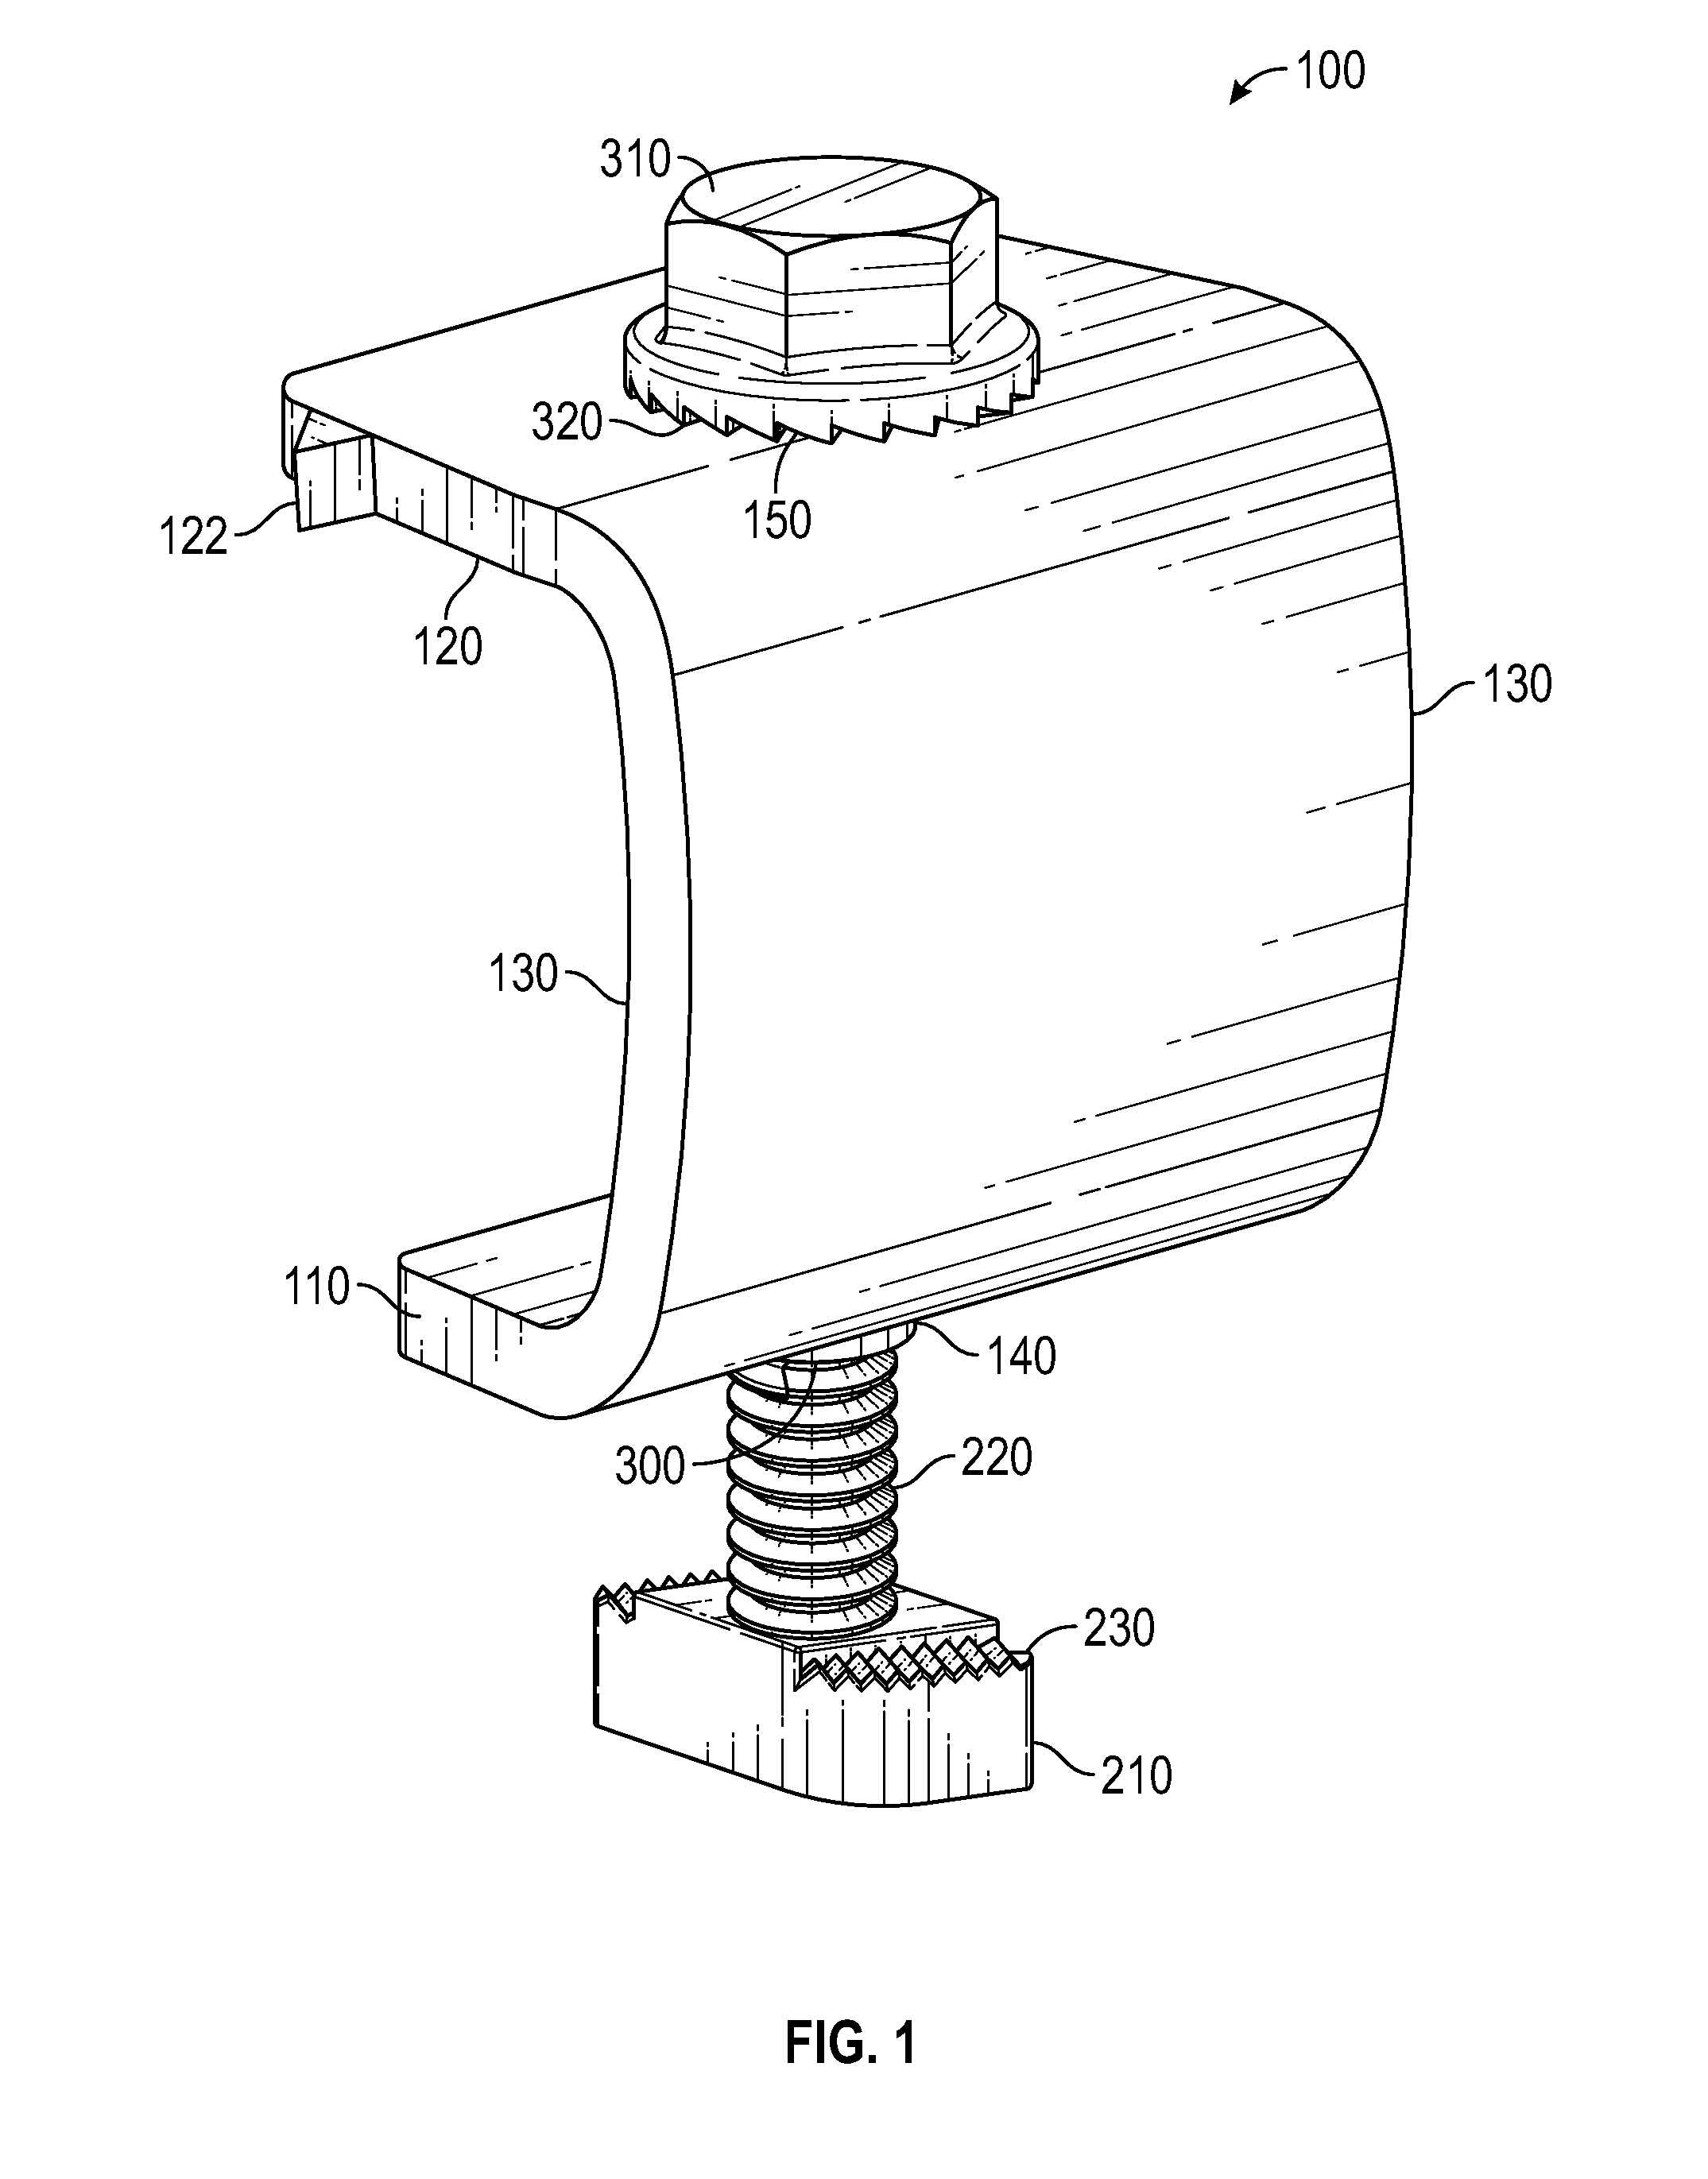 Clamp for securing and electrically bonding solar panels to a rail support